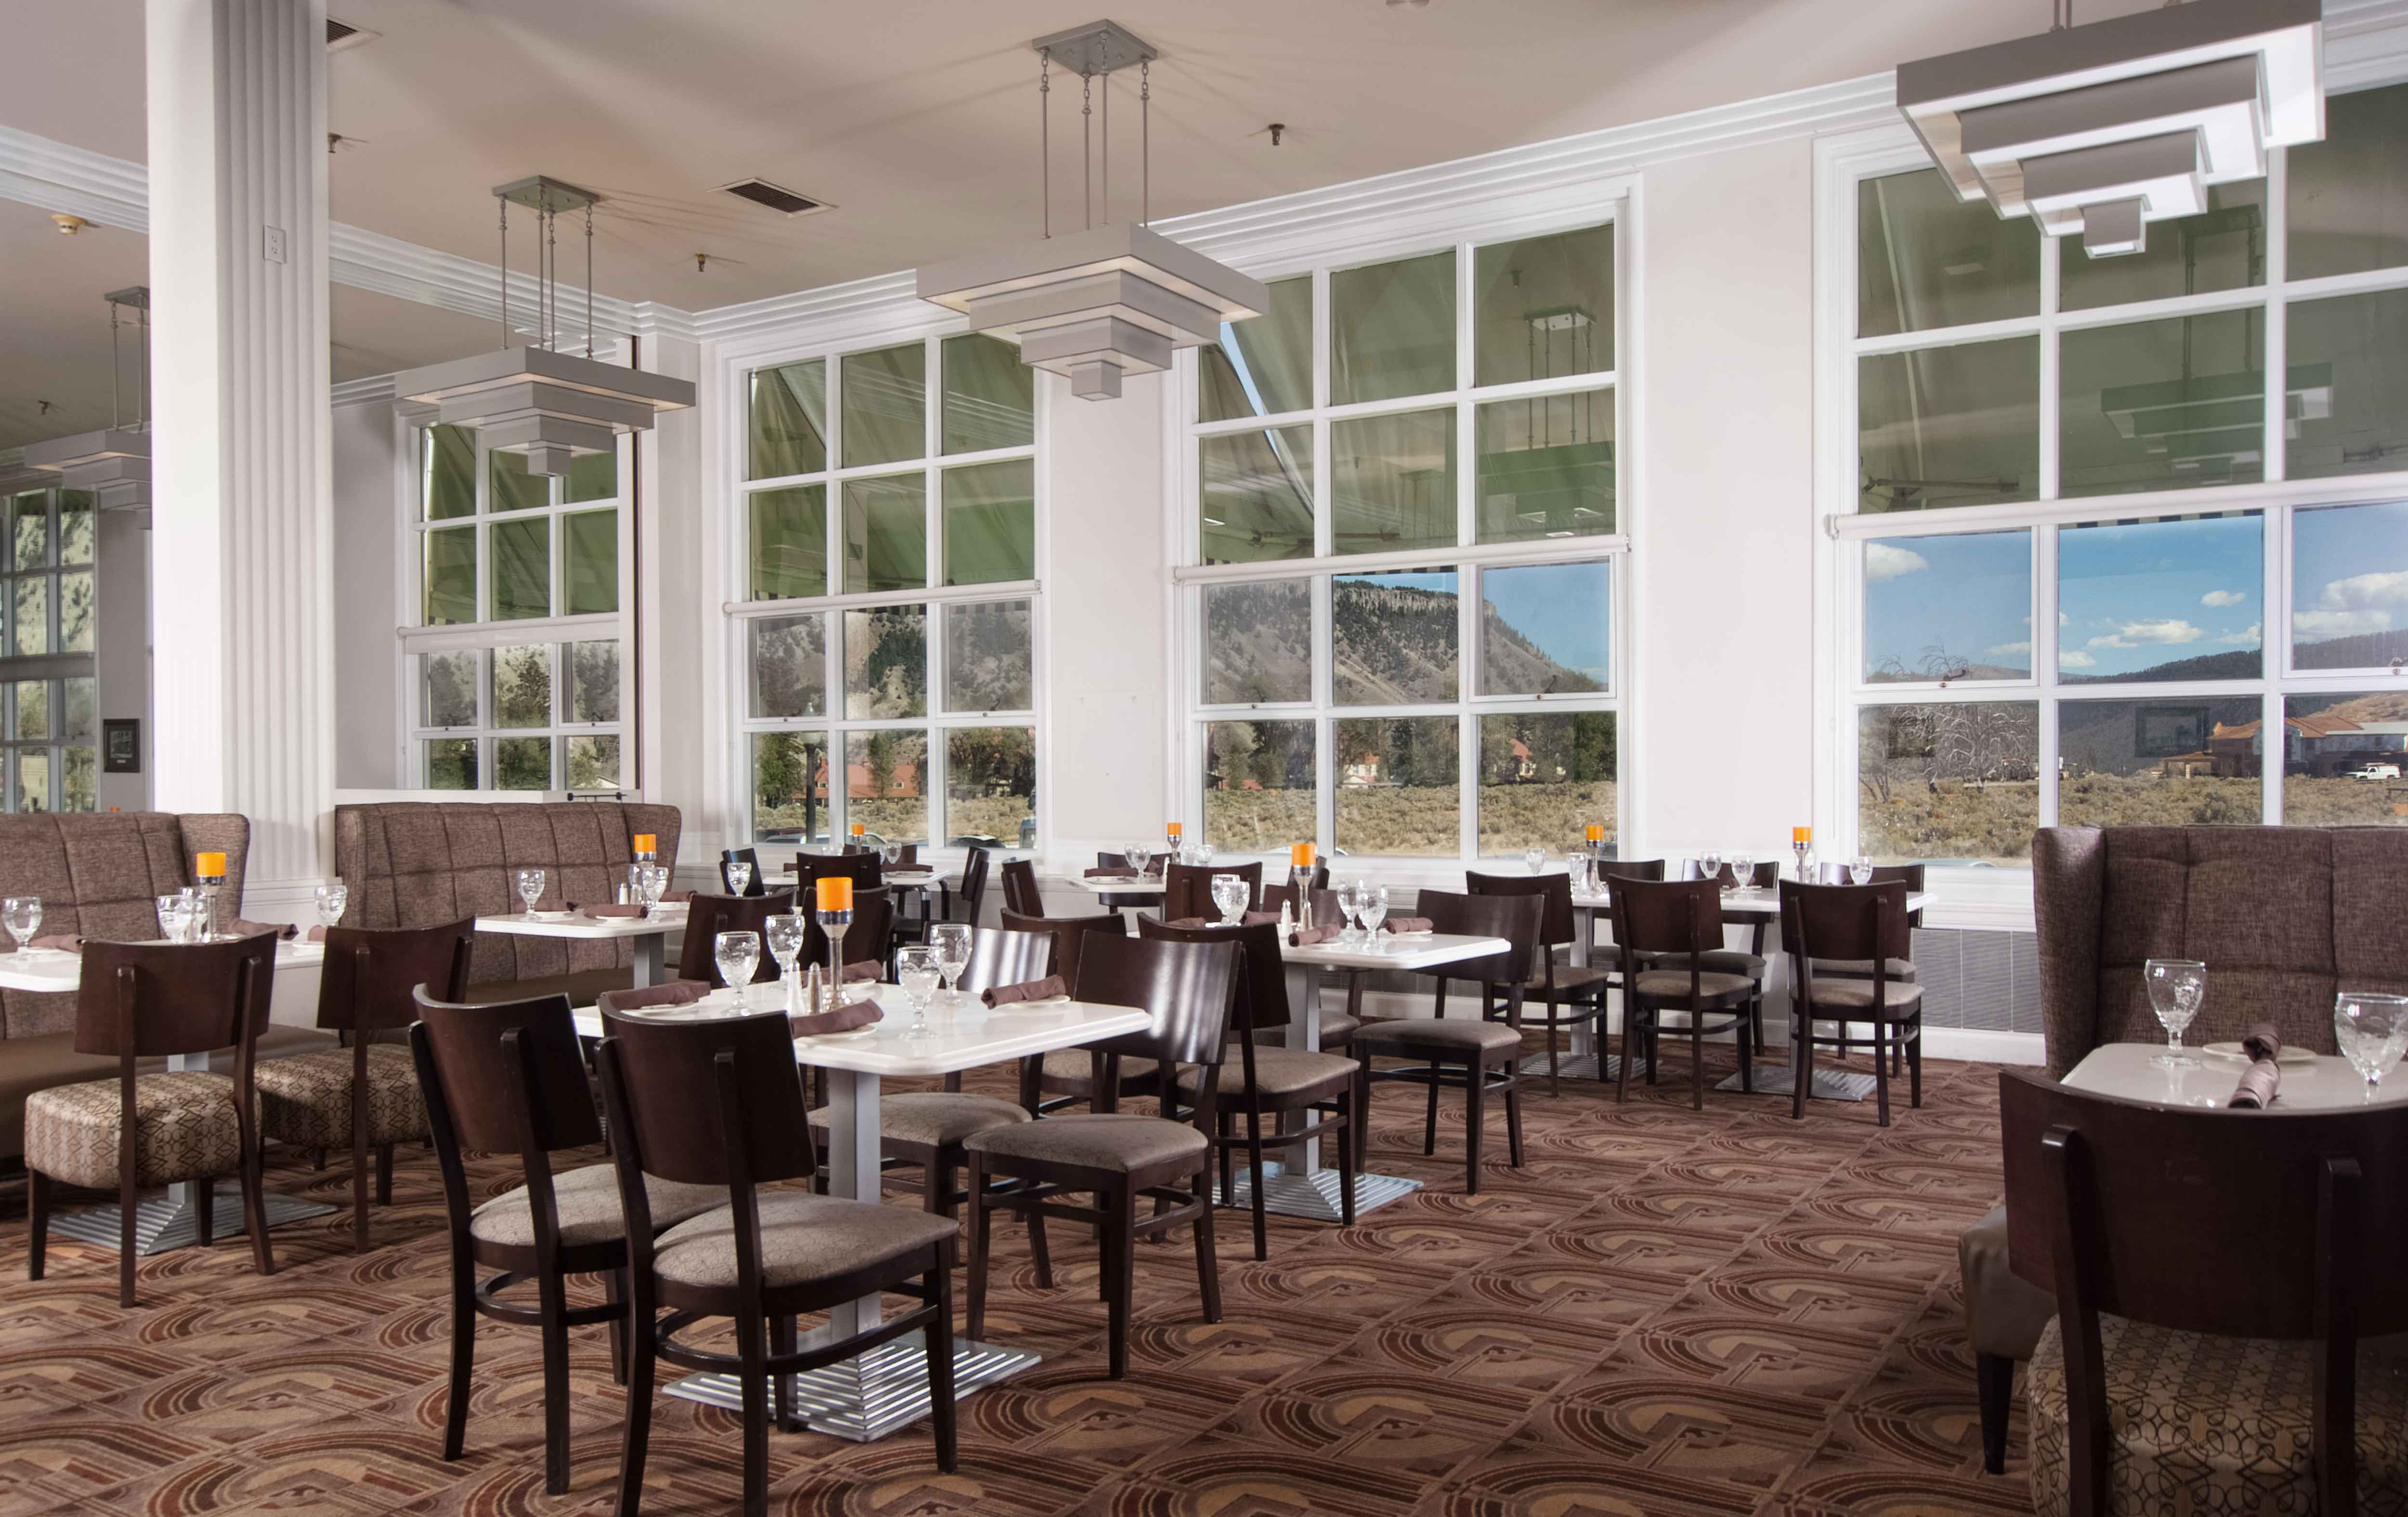 Mammoth Springs Hotel Dining Room Hours